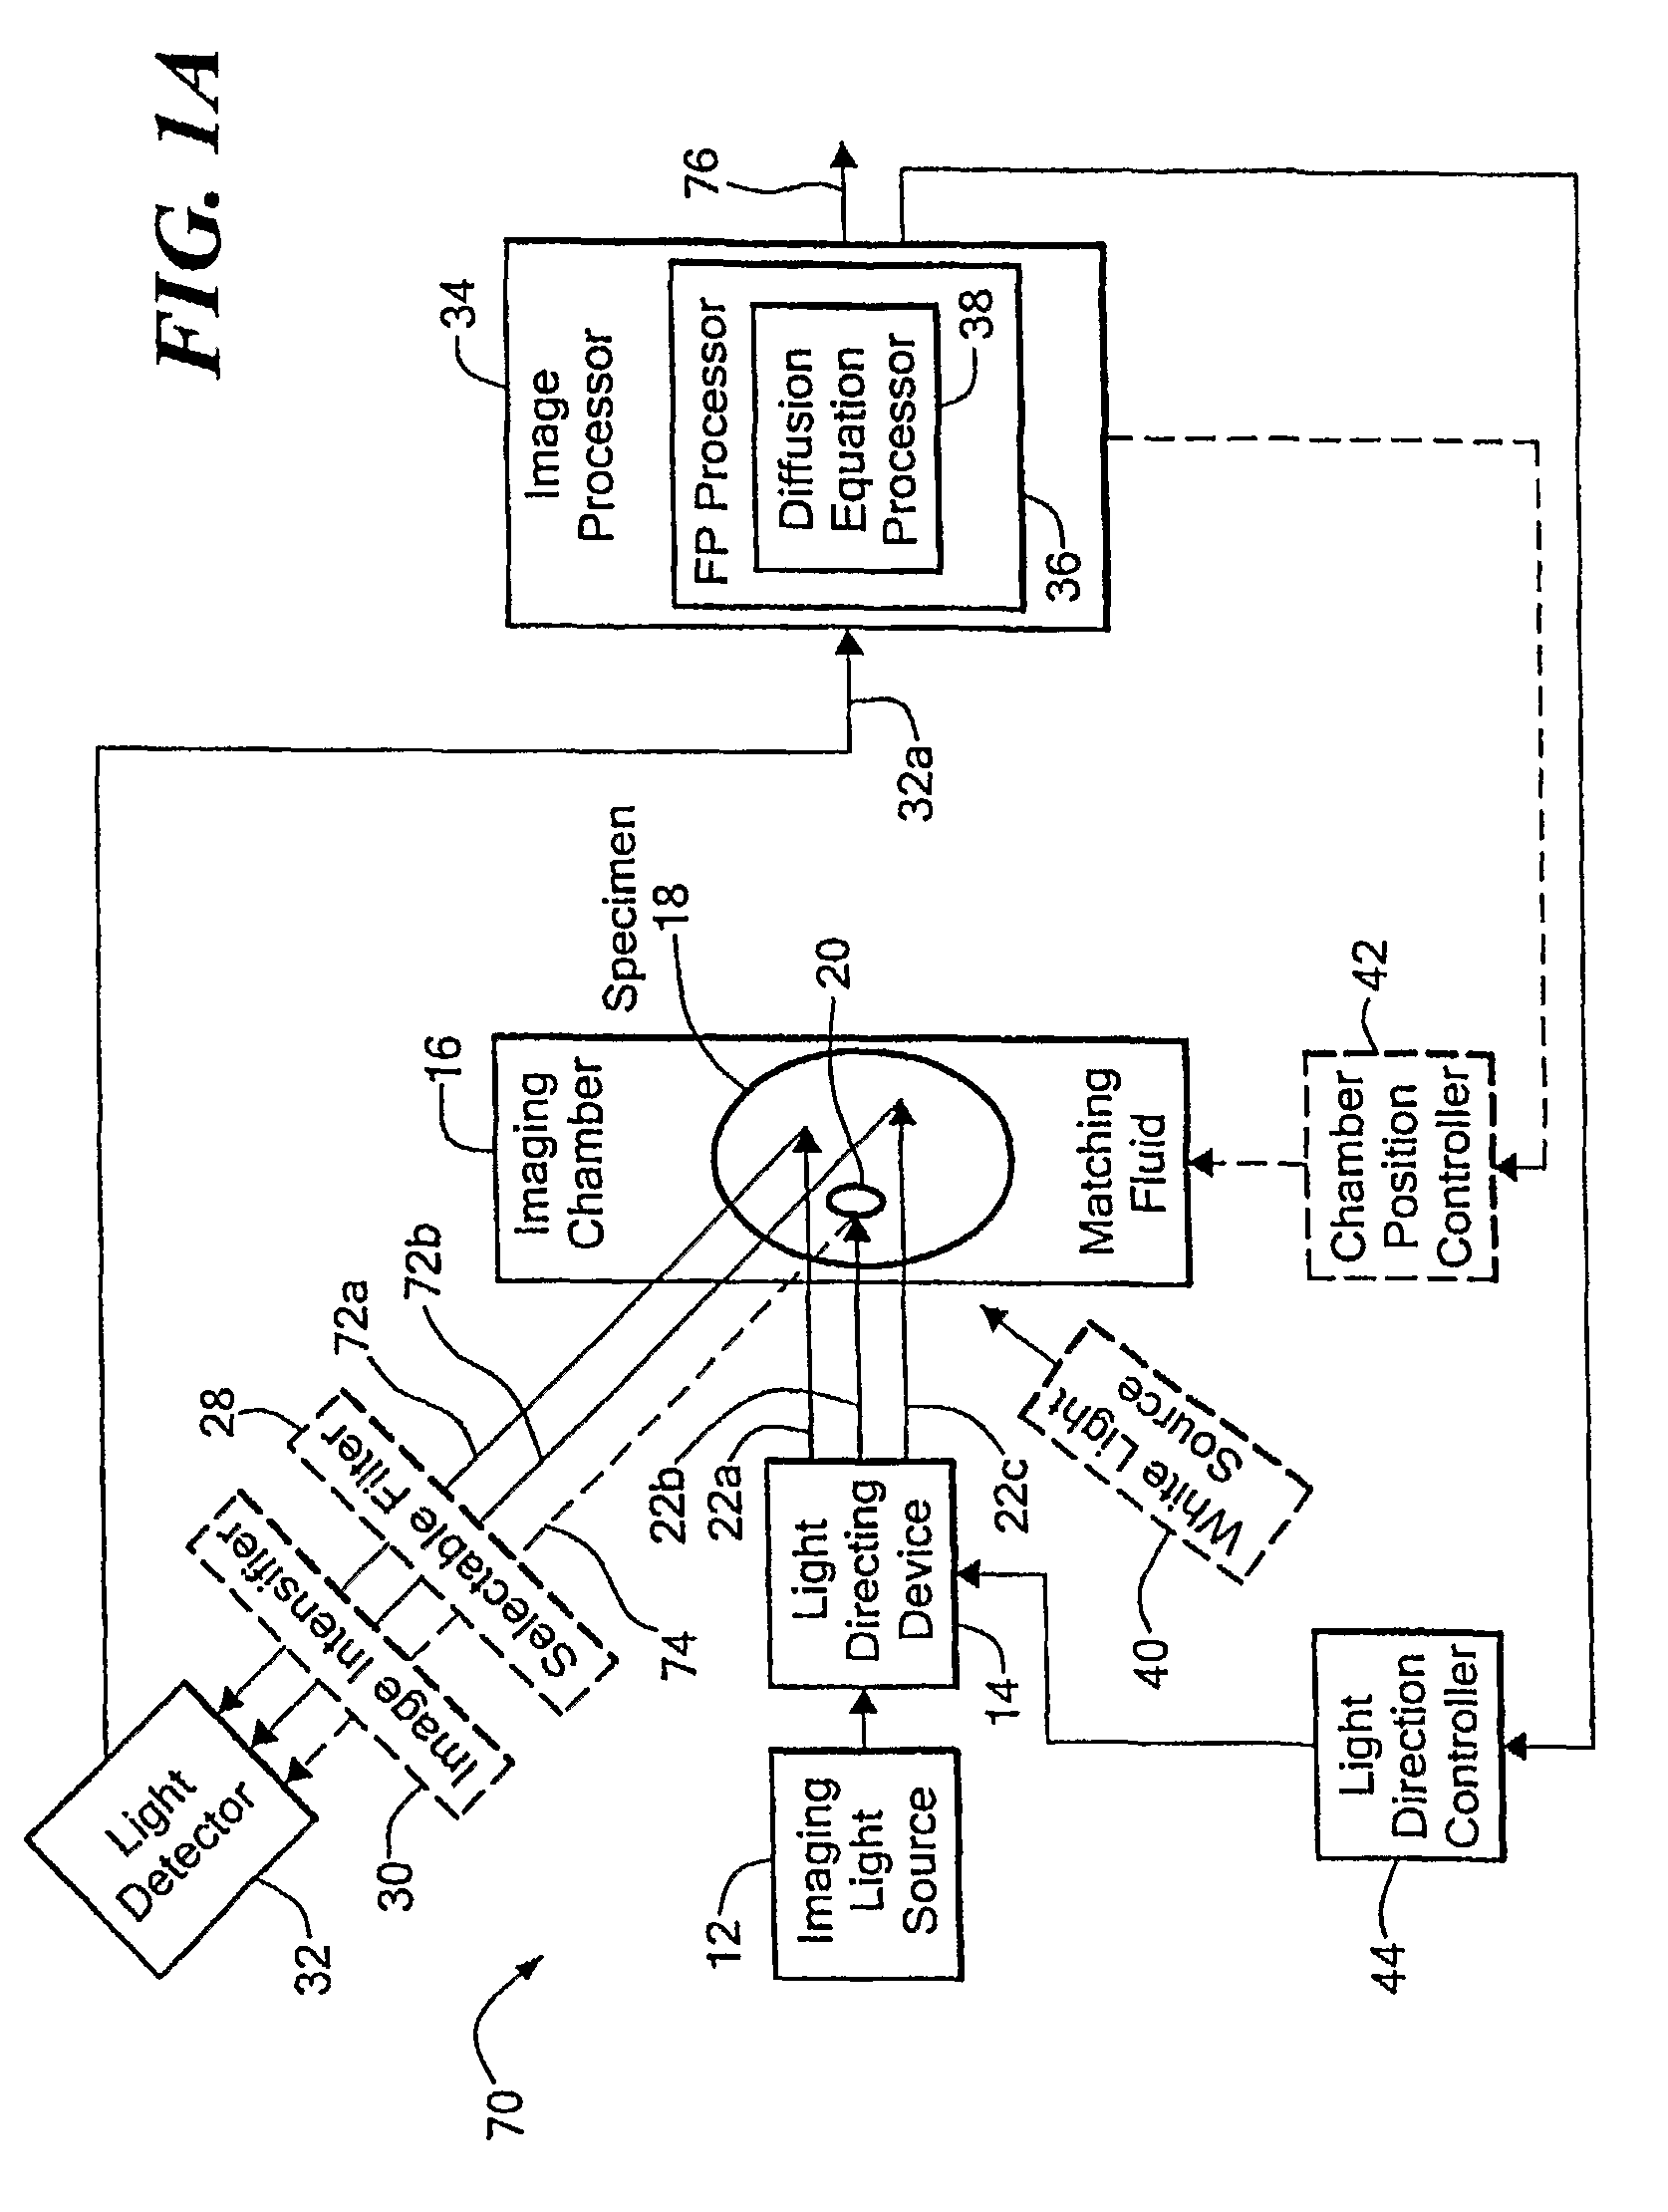 Method and system for tomographic imaging using fluorescent proteins